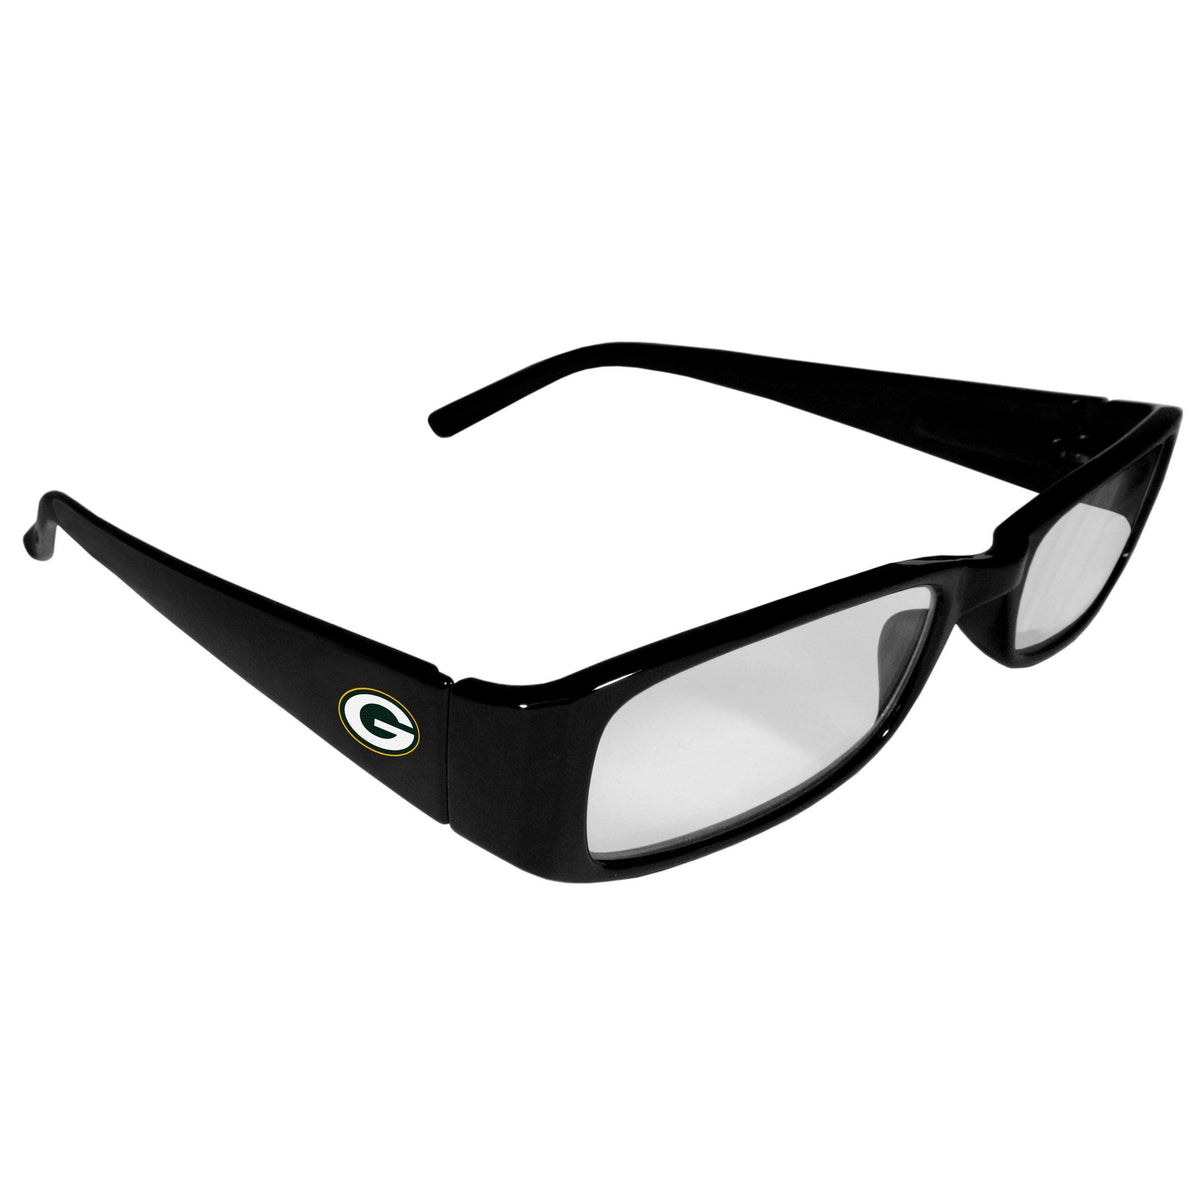 Green Bay Packers Printed Reading Glasses, +1.75 - Flyclothing LLC